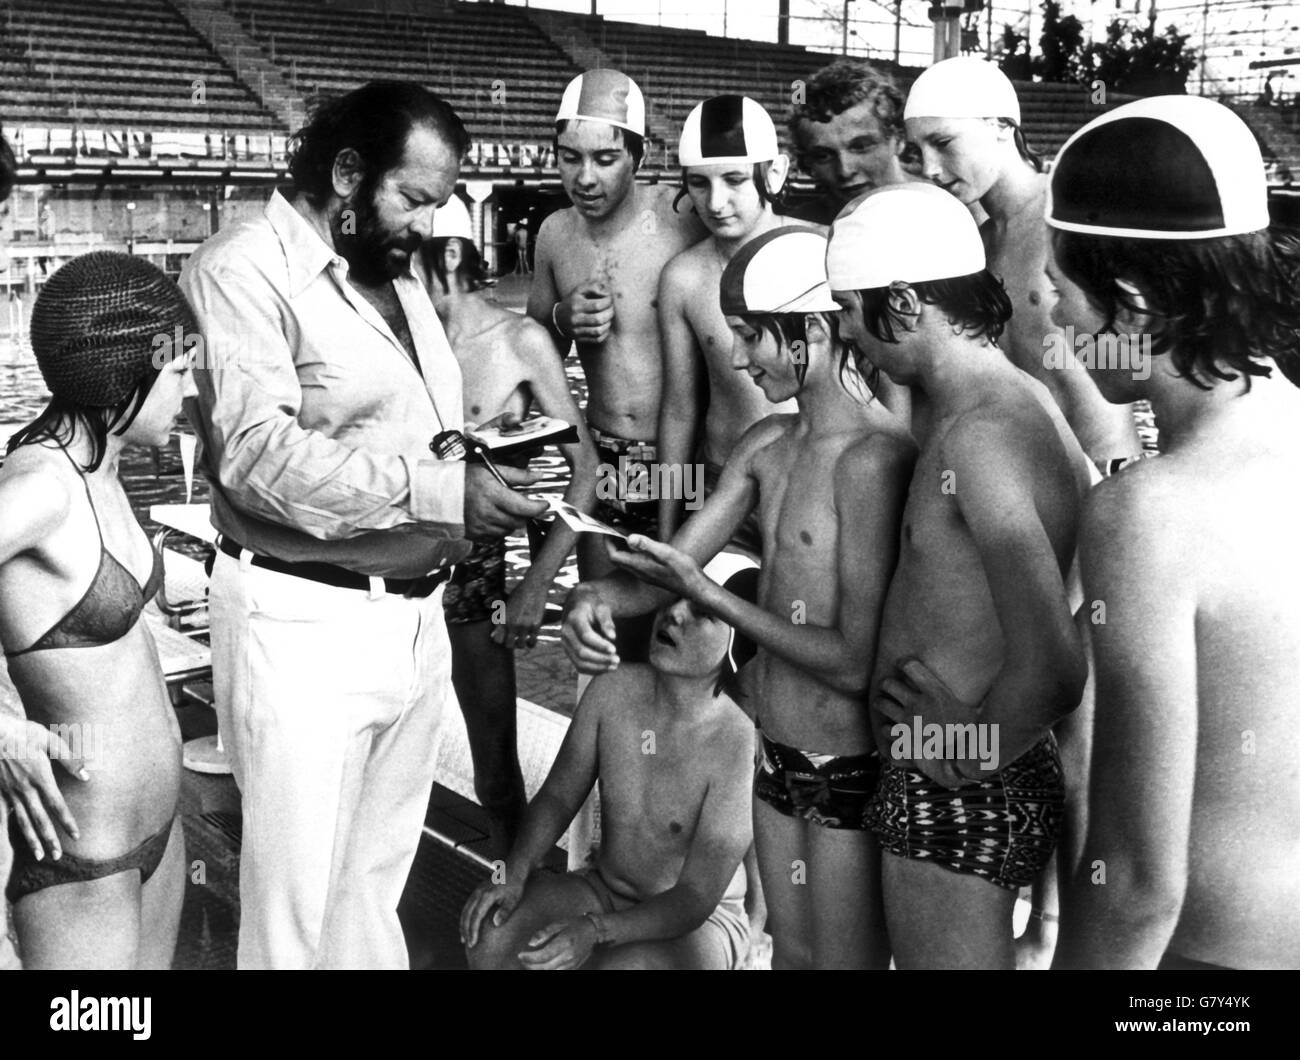 (dpa files) - Italian actor Bud Spencer is crowded by autograph demanding fans at a swimming pool in Munich, Germany, 26 May 1975. Spencer, whose real name is Carlo Pedersoli, studied law and owns a Phd. He took part in the 1952 and 1956 Olympic Games in Helsinki, Finland, and Melbourne, Australia, as a swimmer and water polo player. Spencer who is famous for action movies, was born in Naples, Italy, 31 October 1929. | usage worldwide Stock Photo